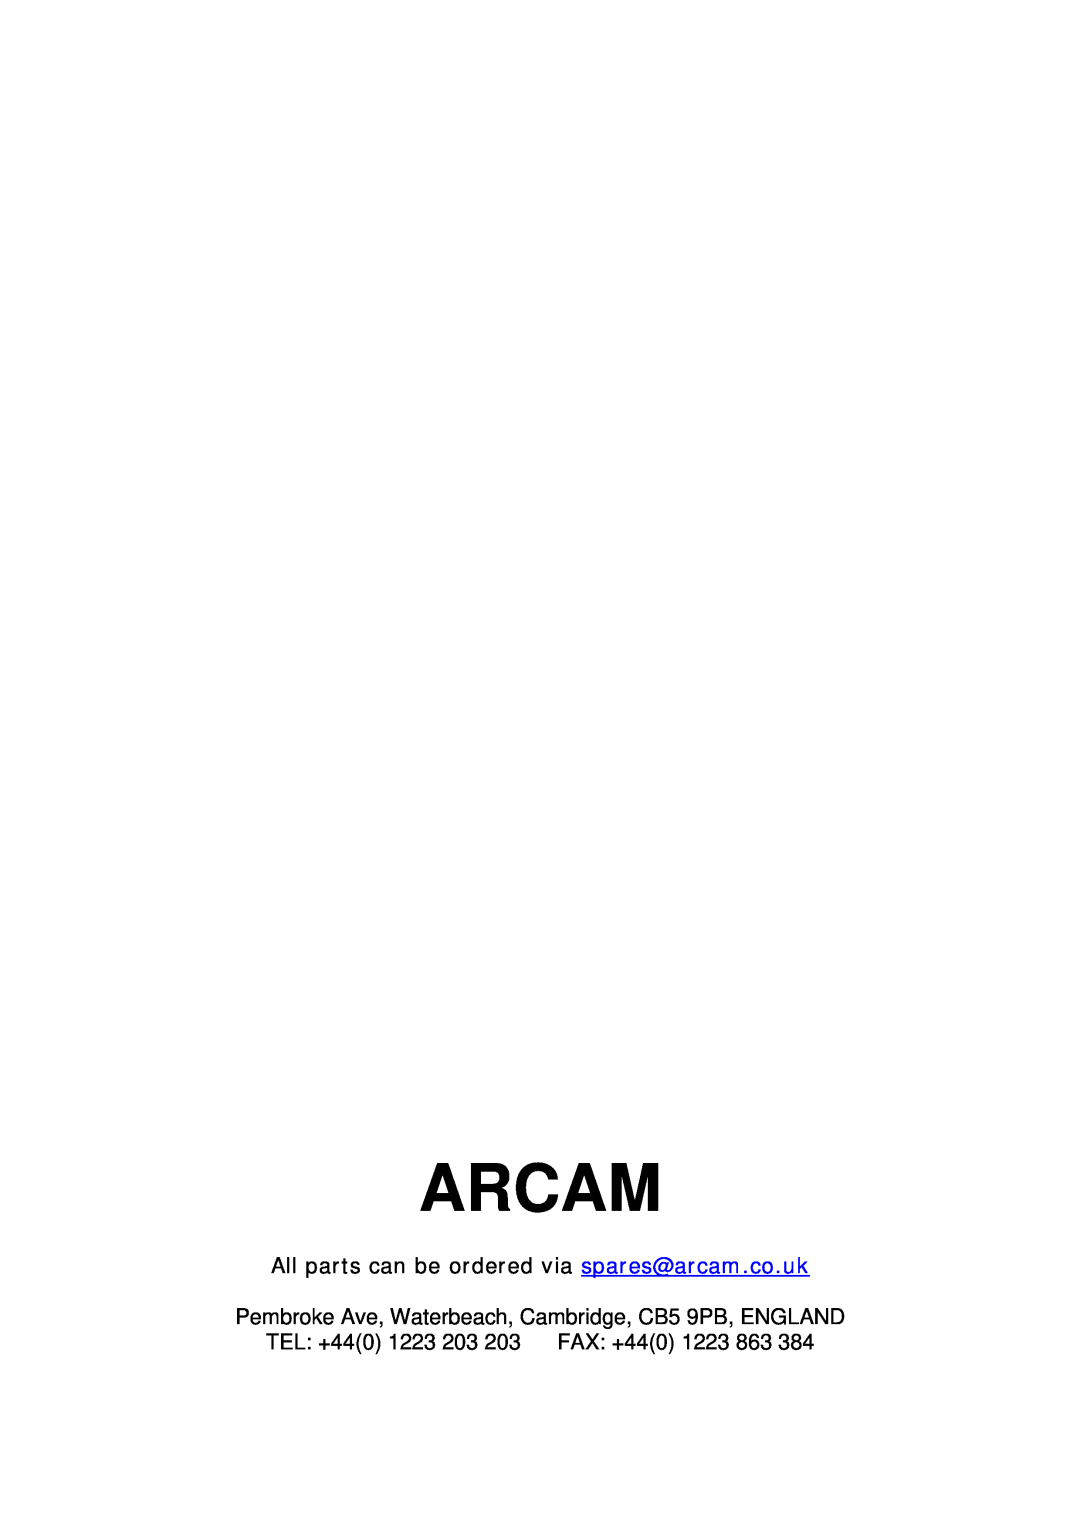 Arcam P35/3, FMJ A32 service manual Arcam, All parts can be ordered via spares@arcam.co.uk, TEL +440 1223 203 203 FAX +440 